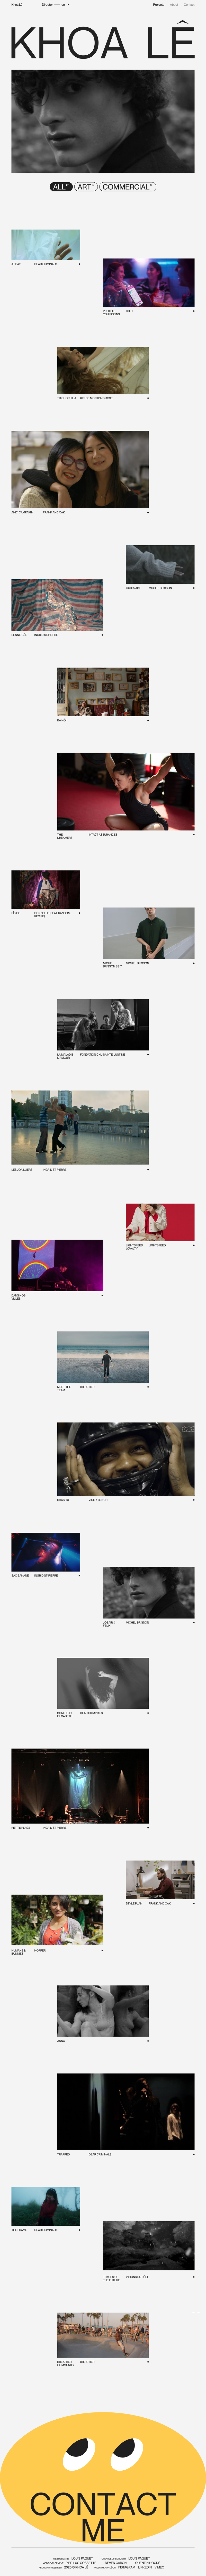 Khoa Lê Landing Page Example: Khoa Lê is a Montreal-based filmmaker, stage director and video designer, author of feature films, documentaries, essays and video installations.